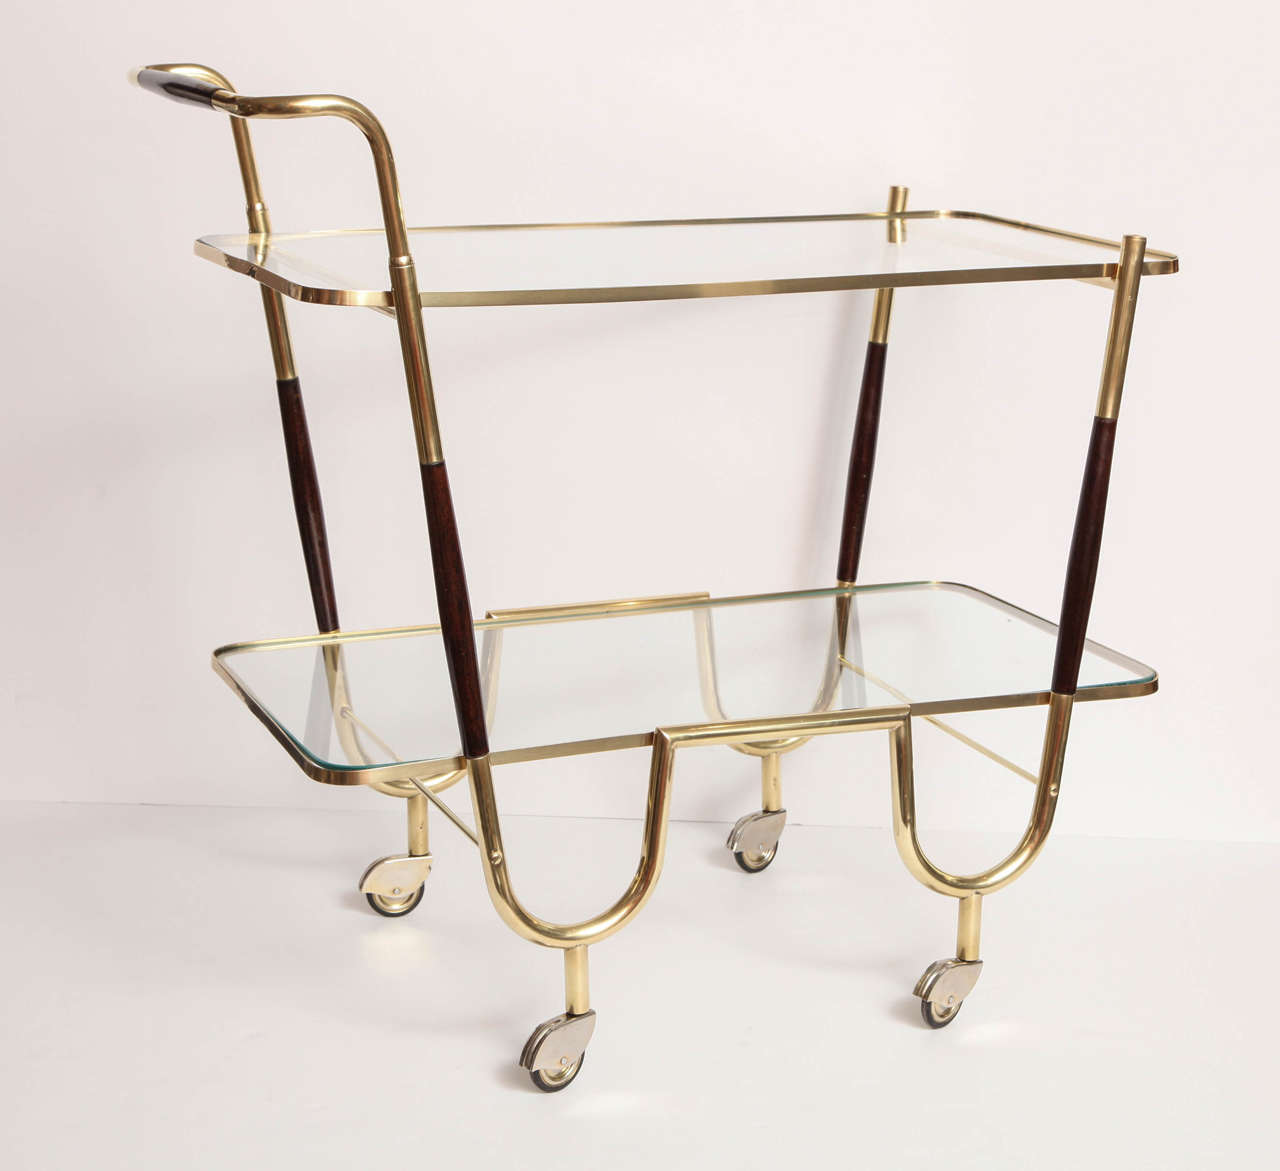 Decorative brass bar cart with mahogany details, Italy, circa 1950. The brass has been polished and is in a very good condition.